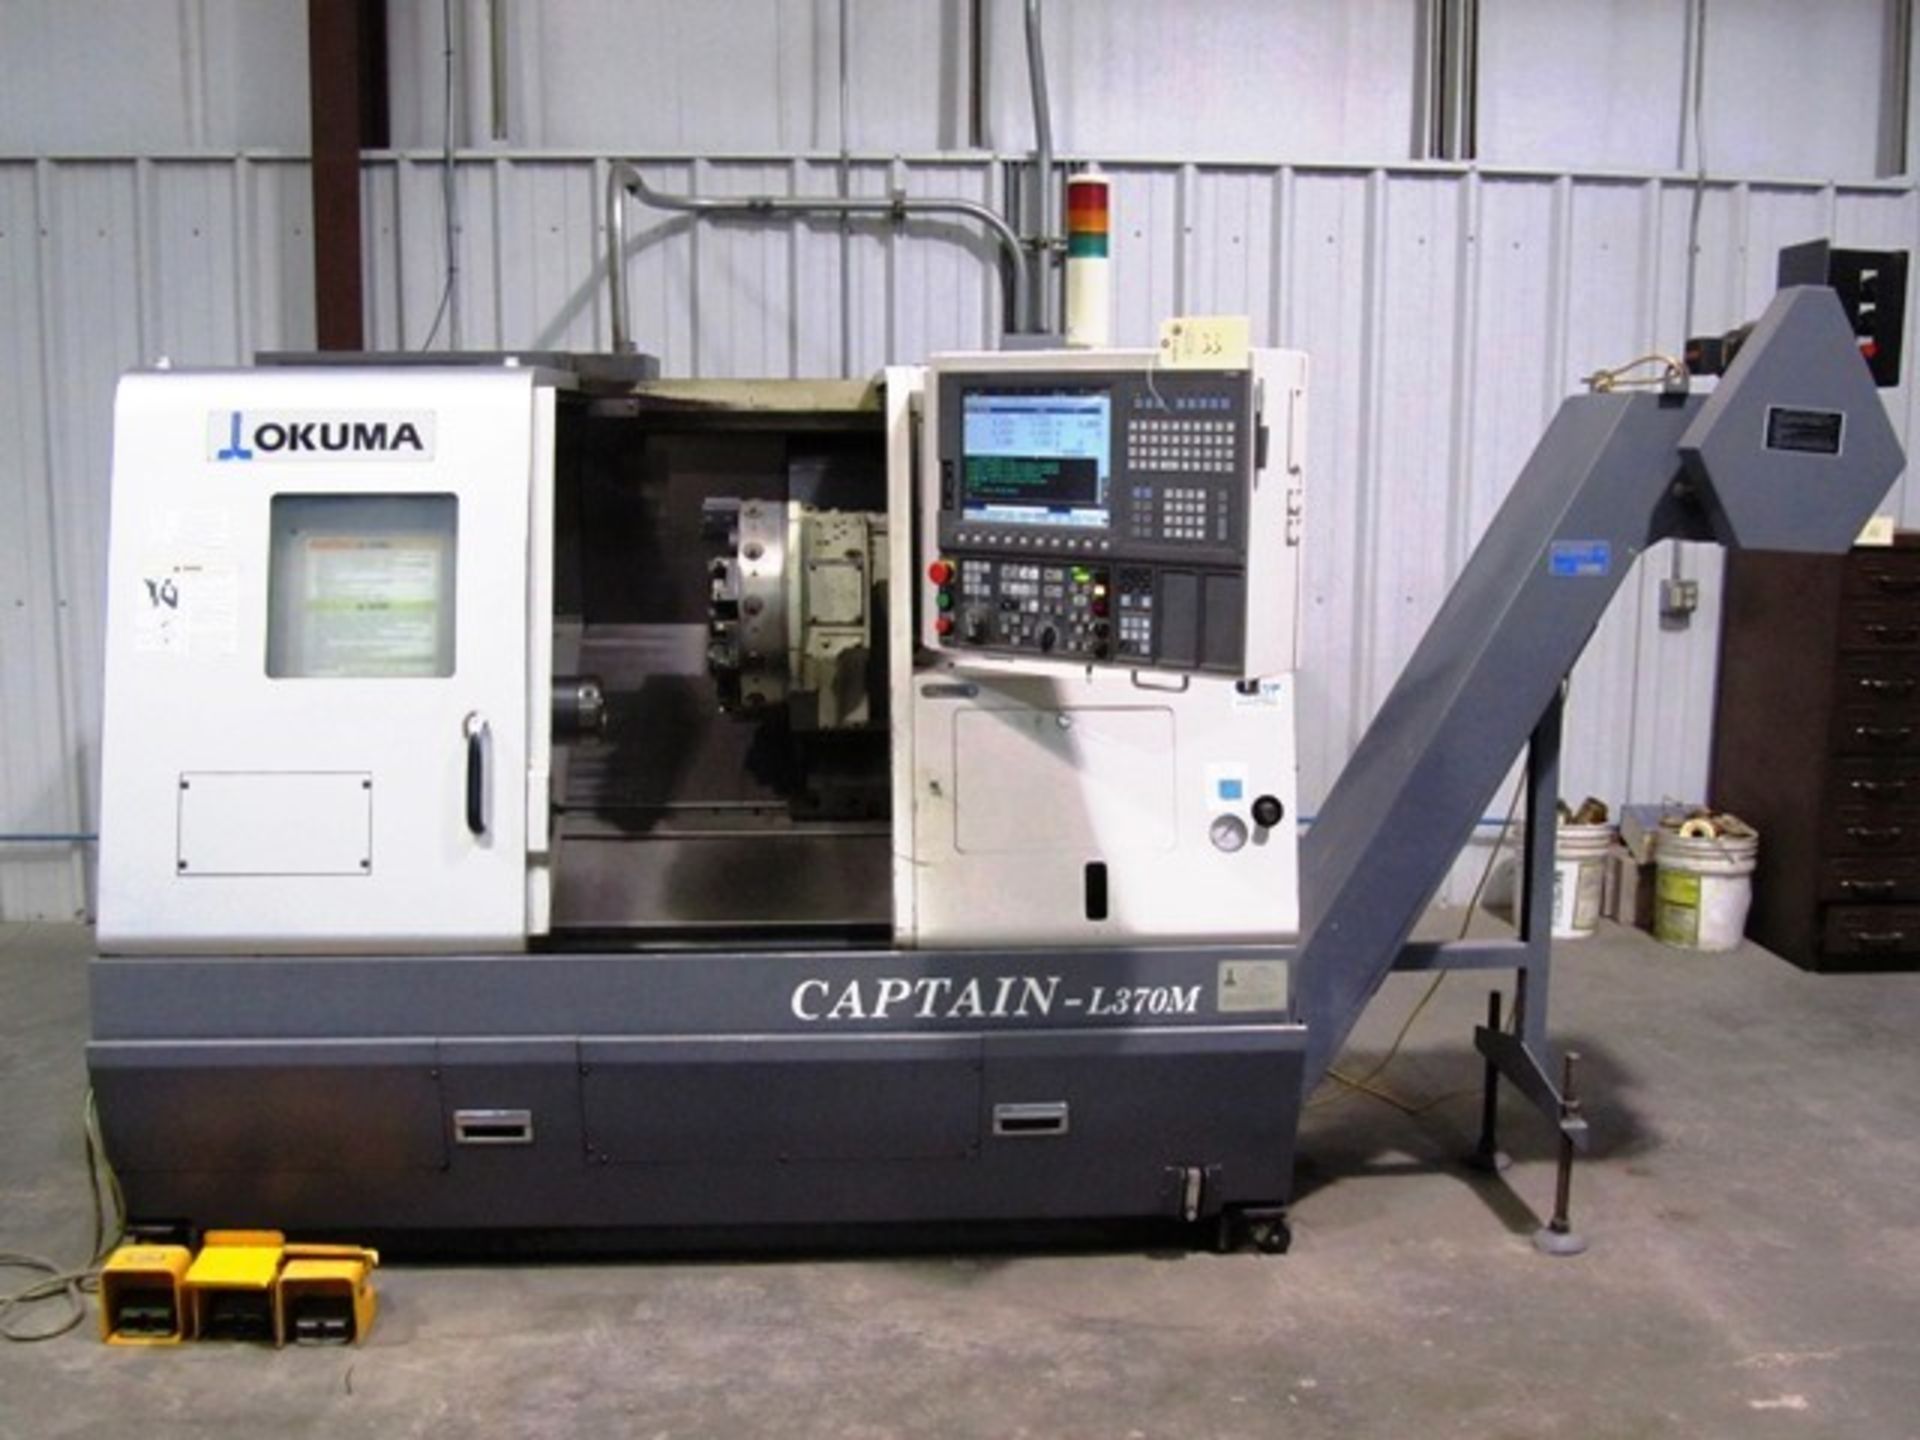 Okuma Model Captain L370M CNC Turning Center with Milling, `C' Axis, 12 Station Turret, Collet - Image 4 of 7